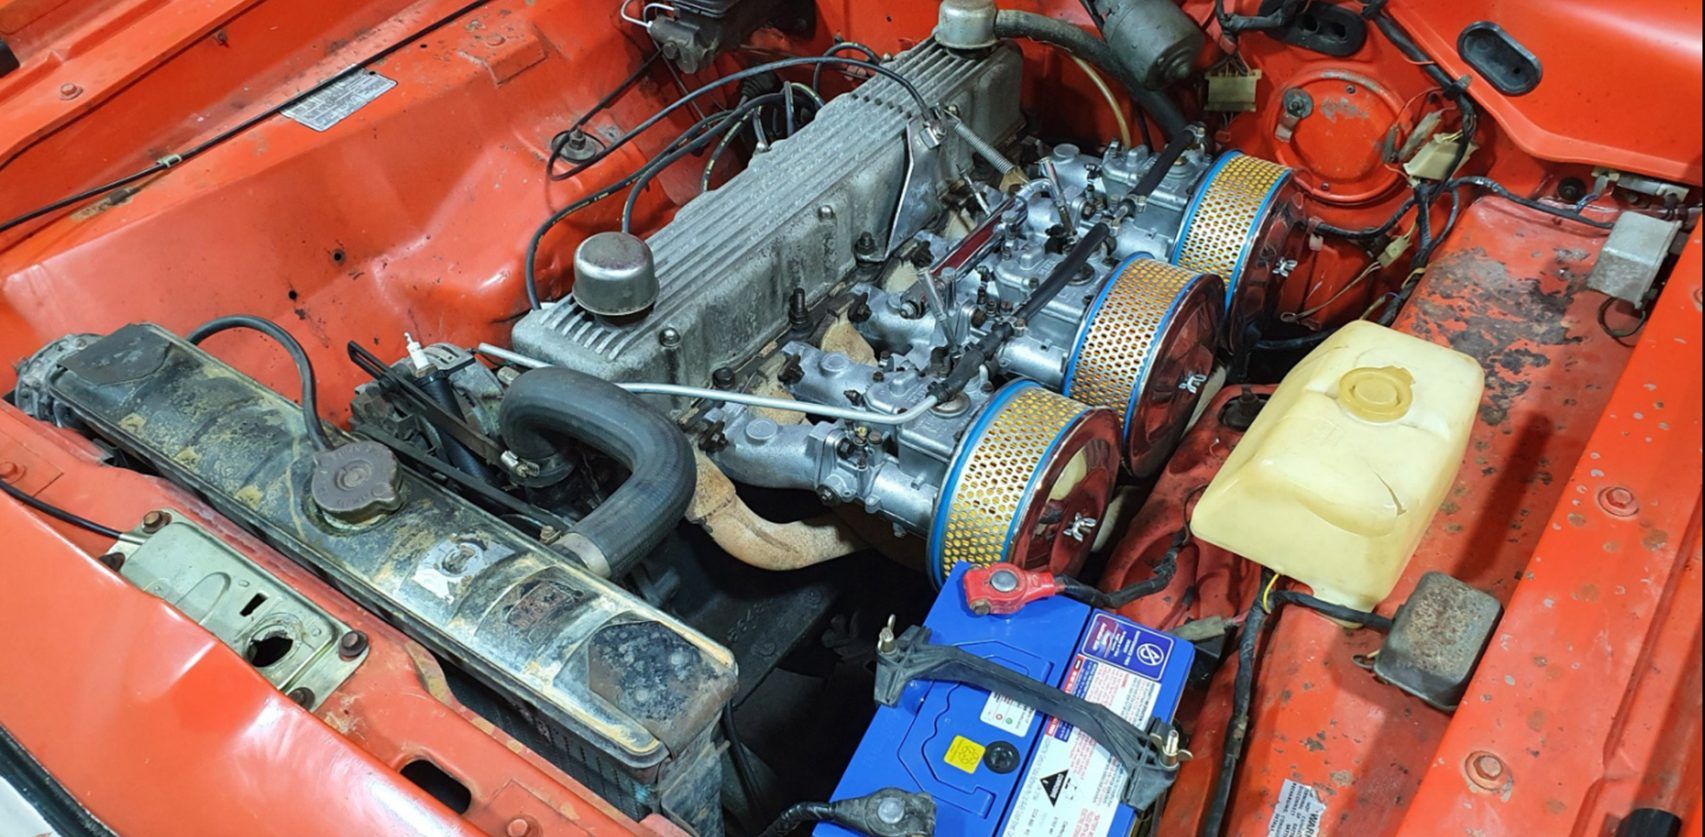 1972 Valiant Charger RT engine